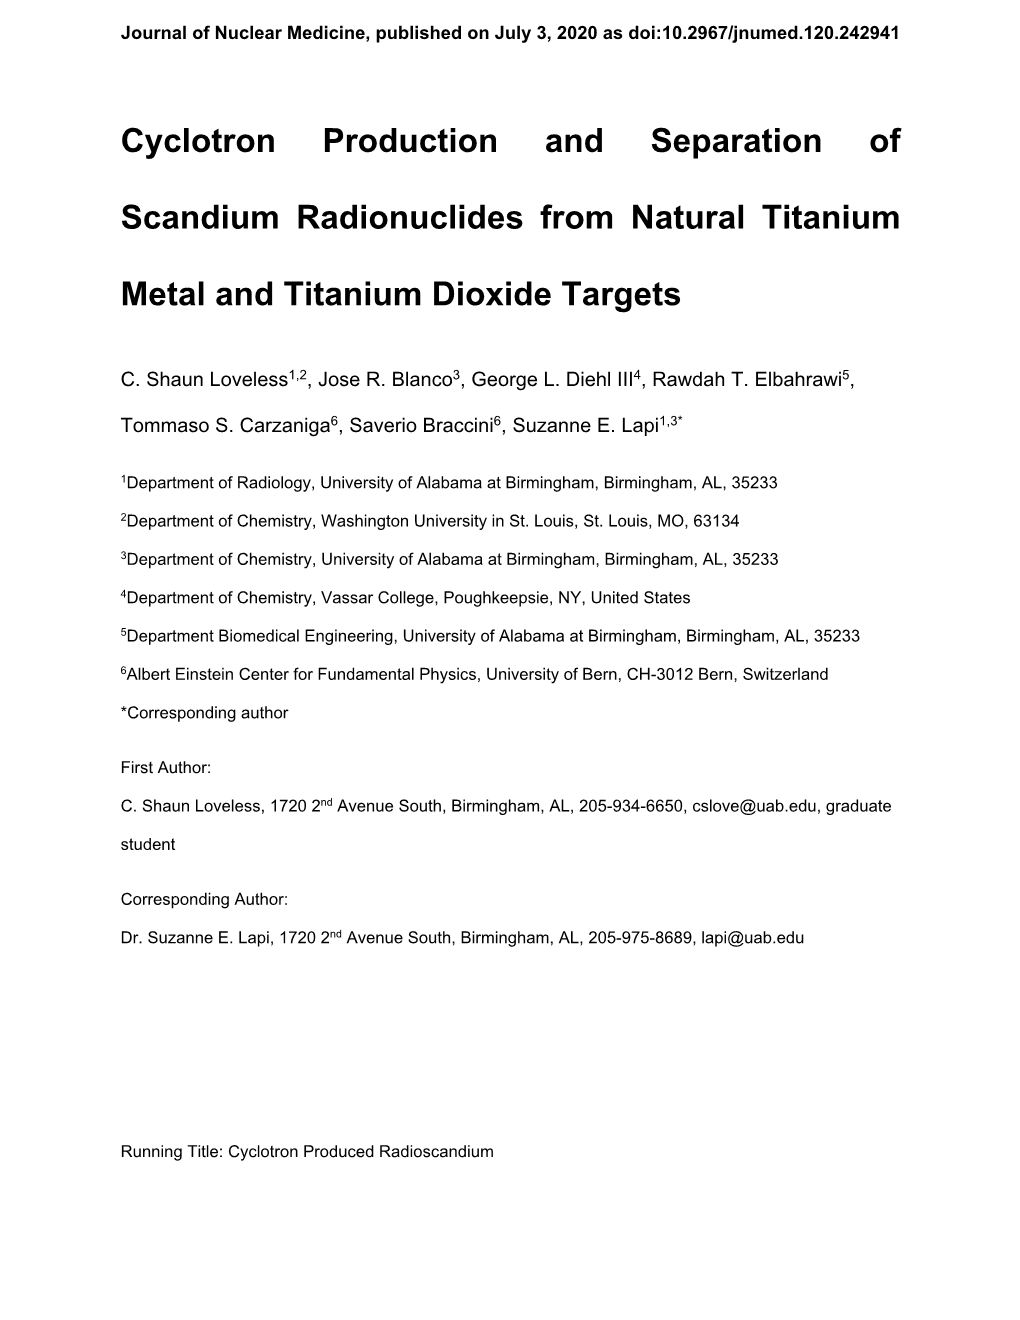 Cyclotron Production and Separation of Scandium Radionuclides From